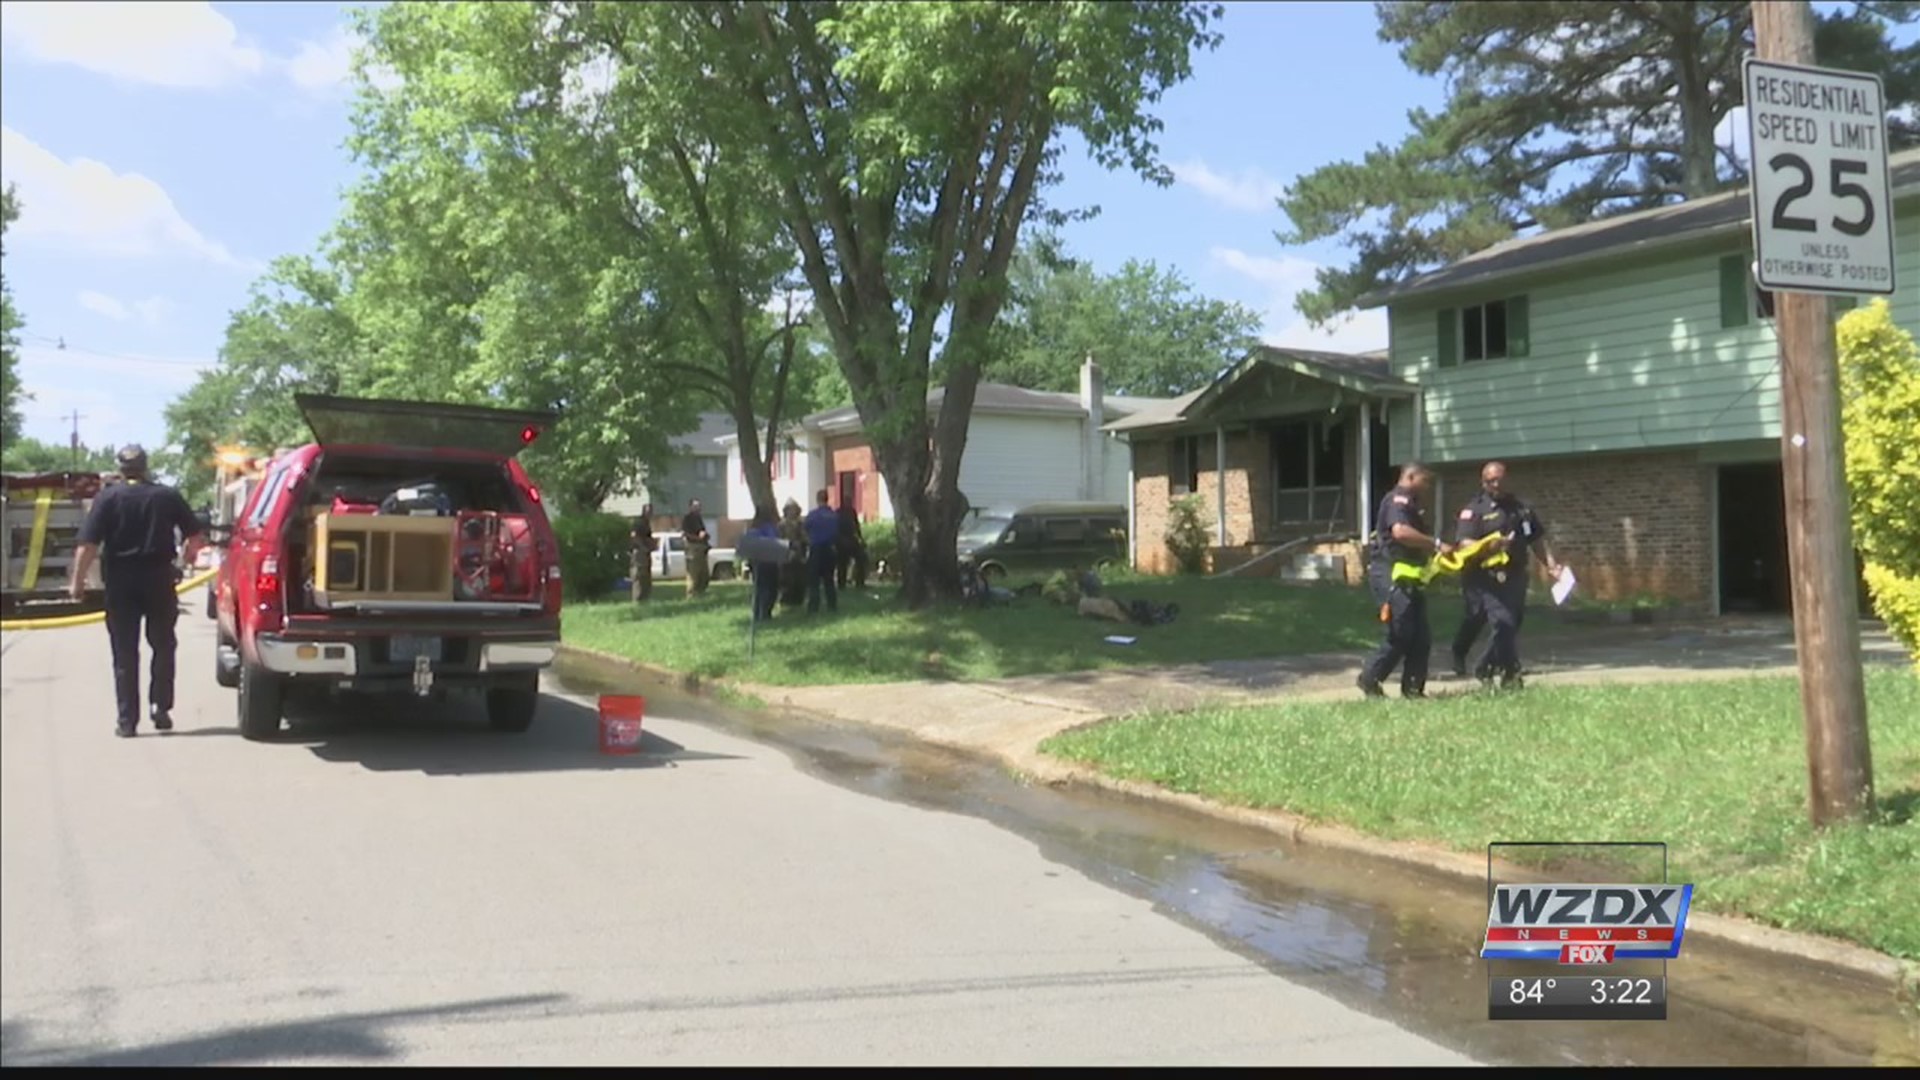 Investigators are back at the scene of a house fire trying to determine the cause.